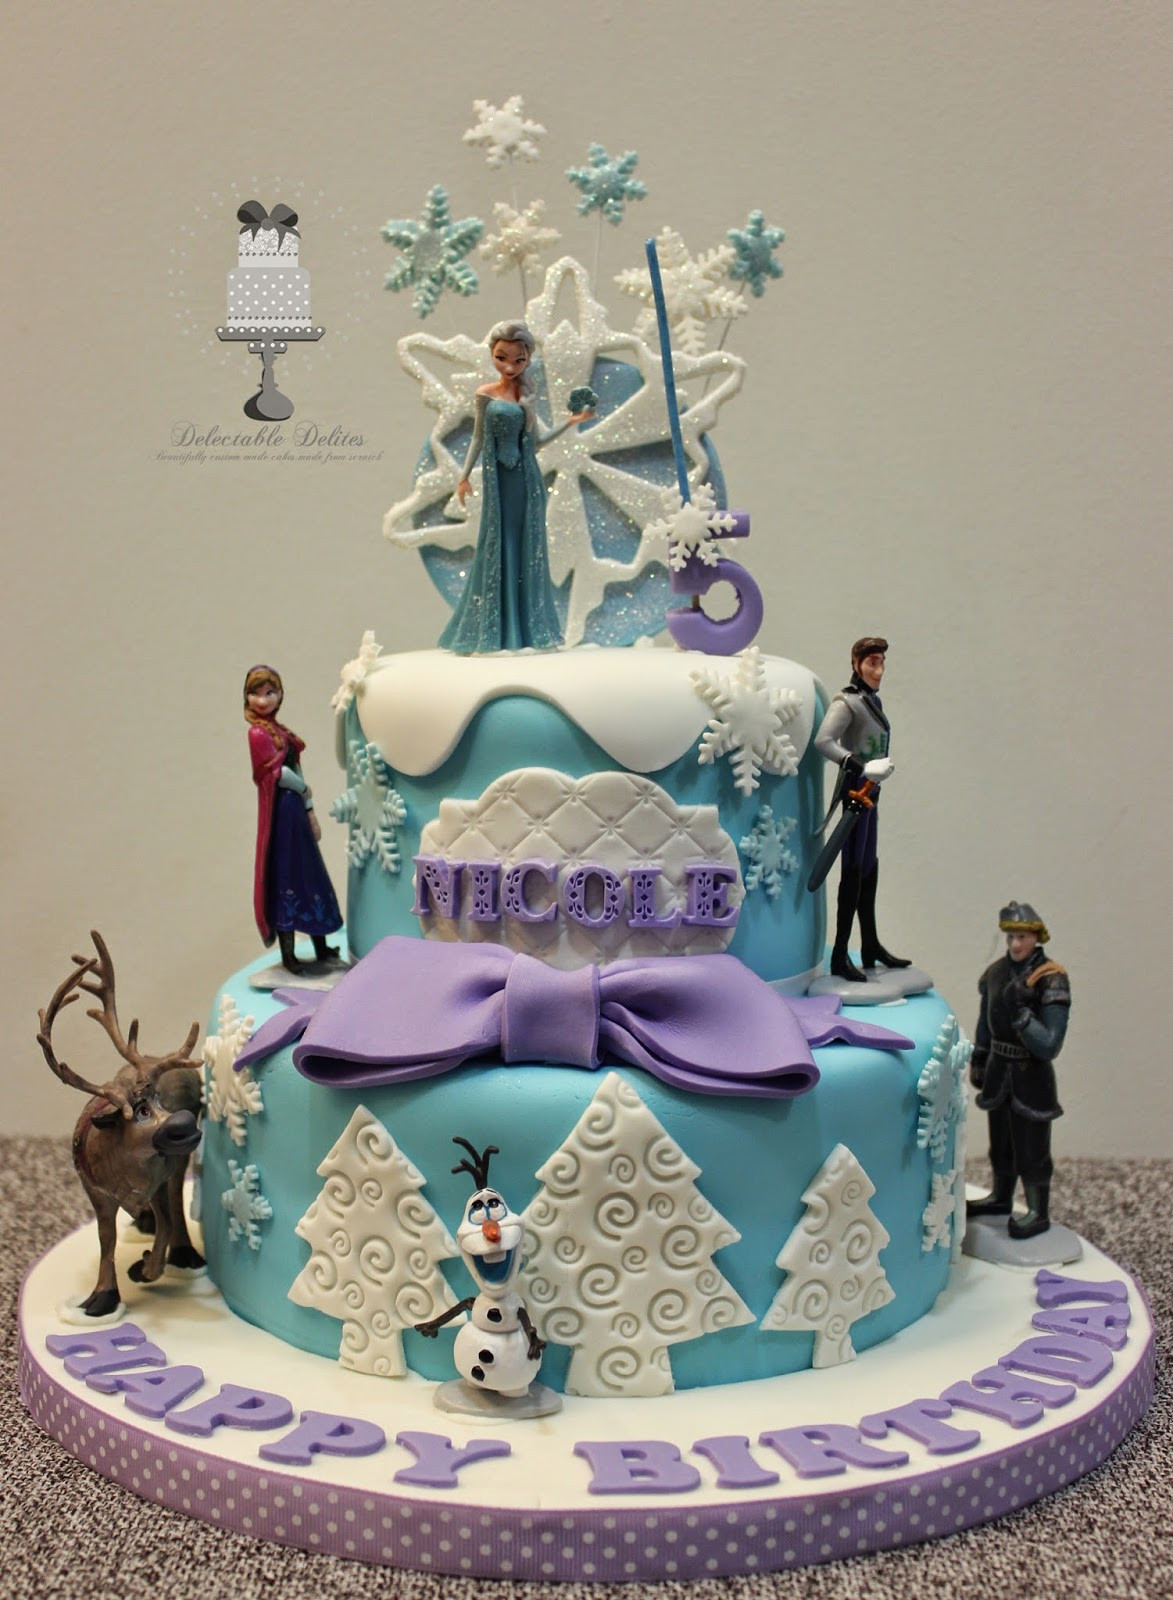 Frozen Themed Birthday Cakes
 Delectable Delites Frozen theme cake for Nicole s 5th